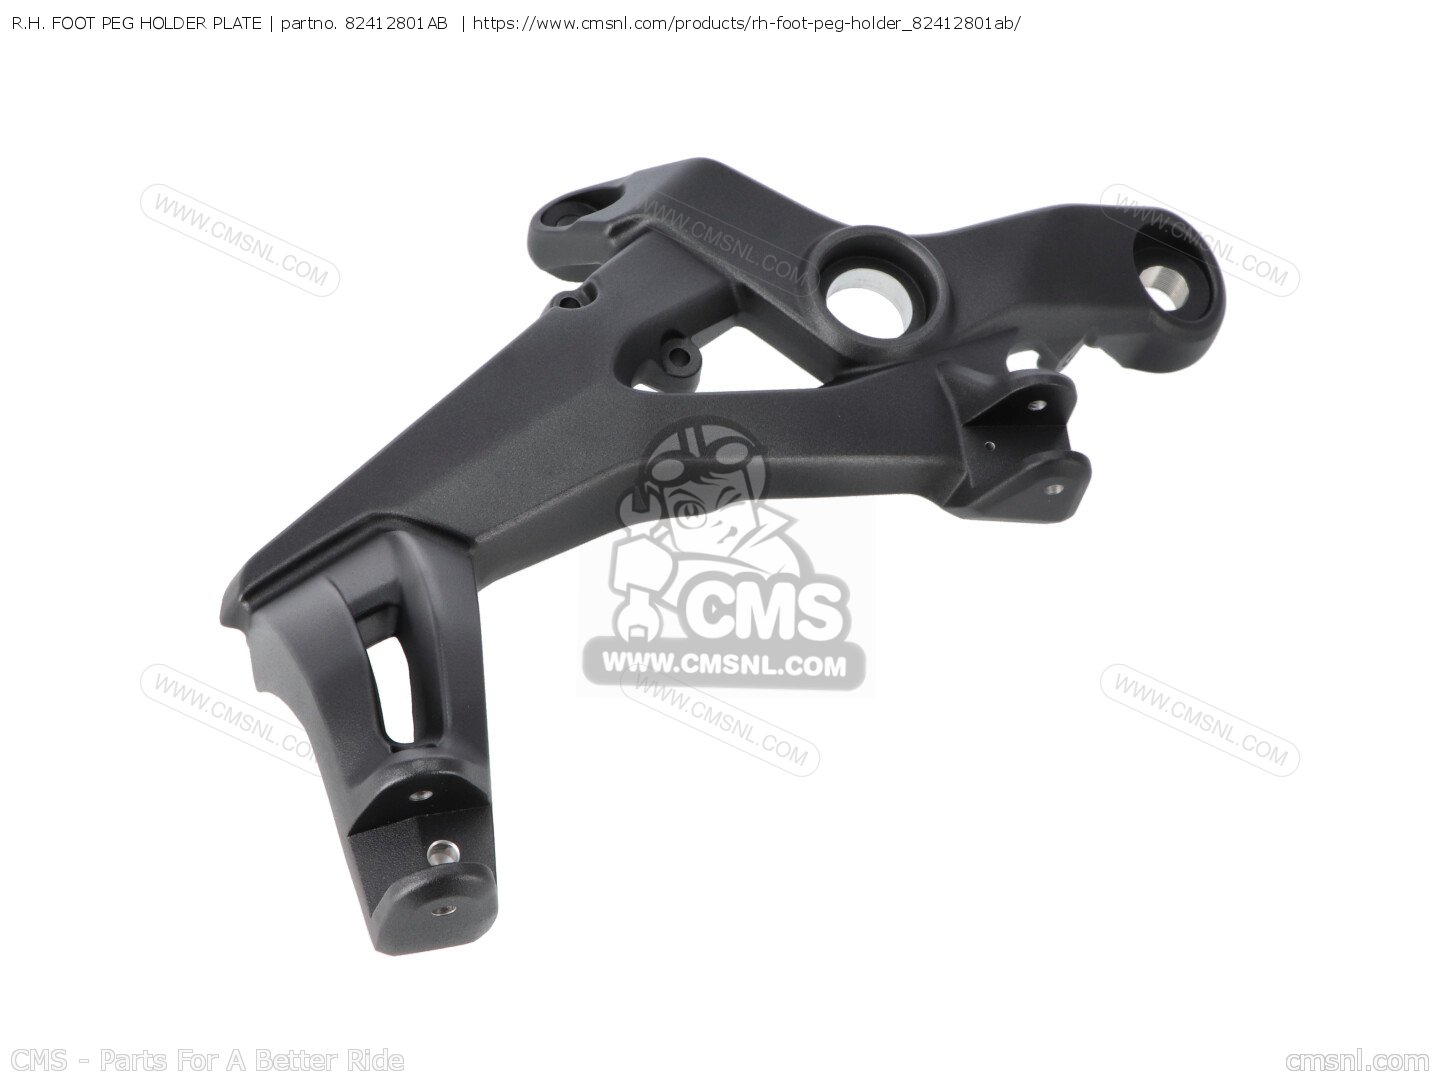 82412801AB: R.h. Foot Peg Holder Plate Ducati - buy the 82412801AB